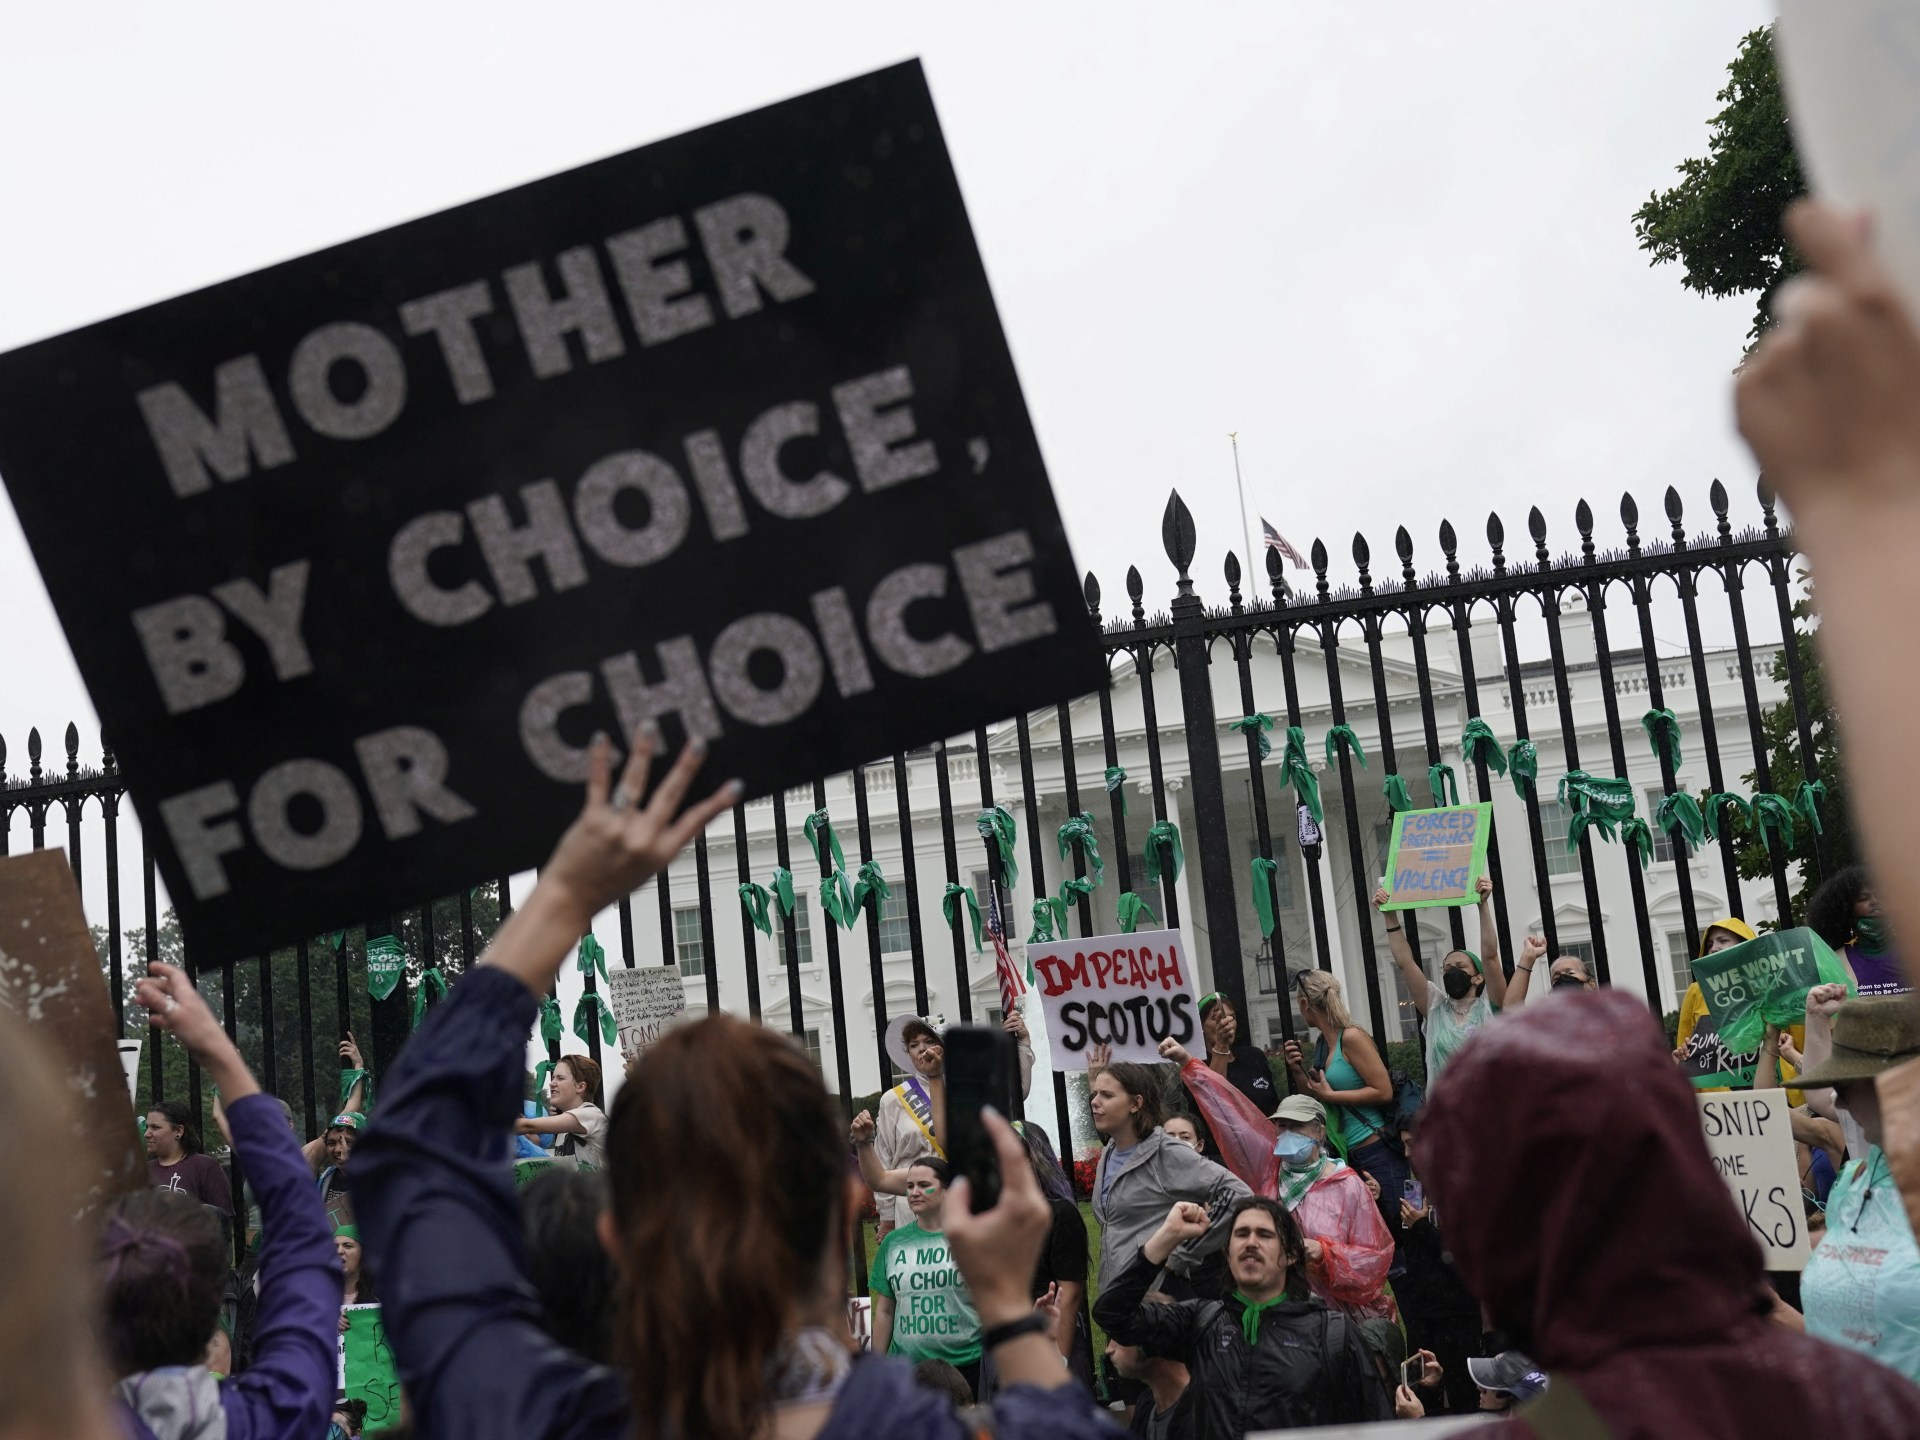 The US war on reproductive rights should concern women everywhere | Women’s Rights